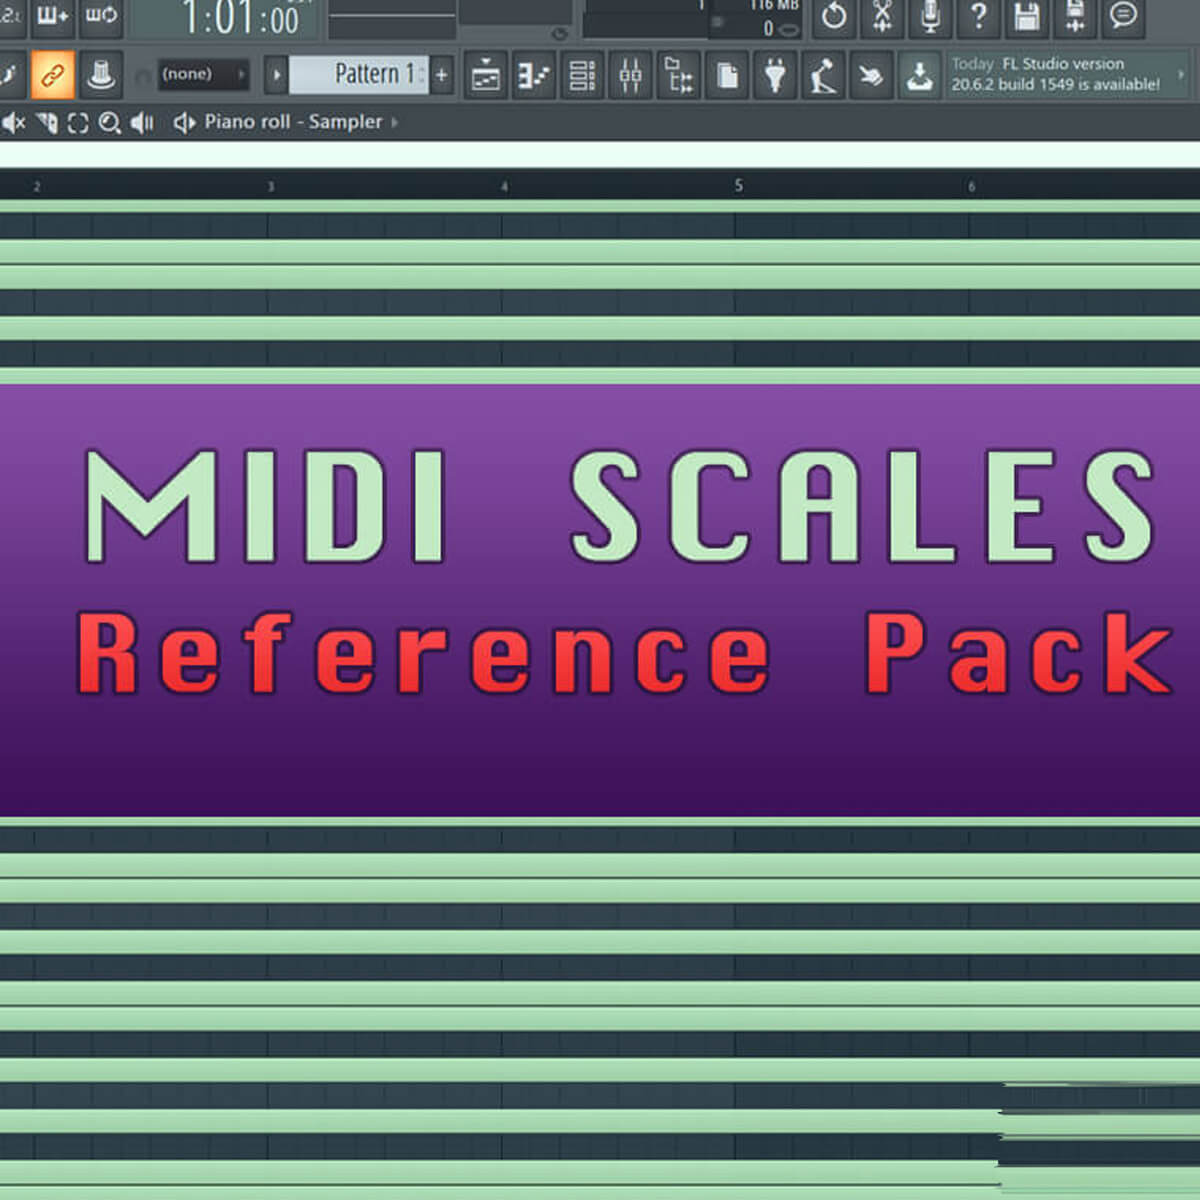 MIDI Scales Reference Pack